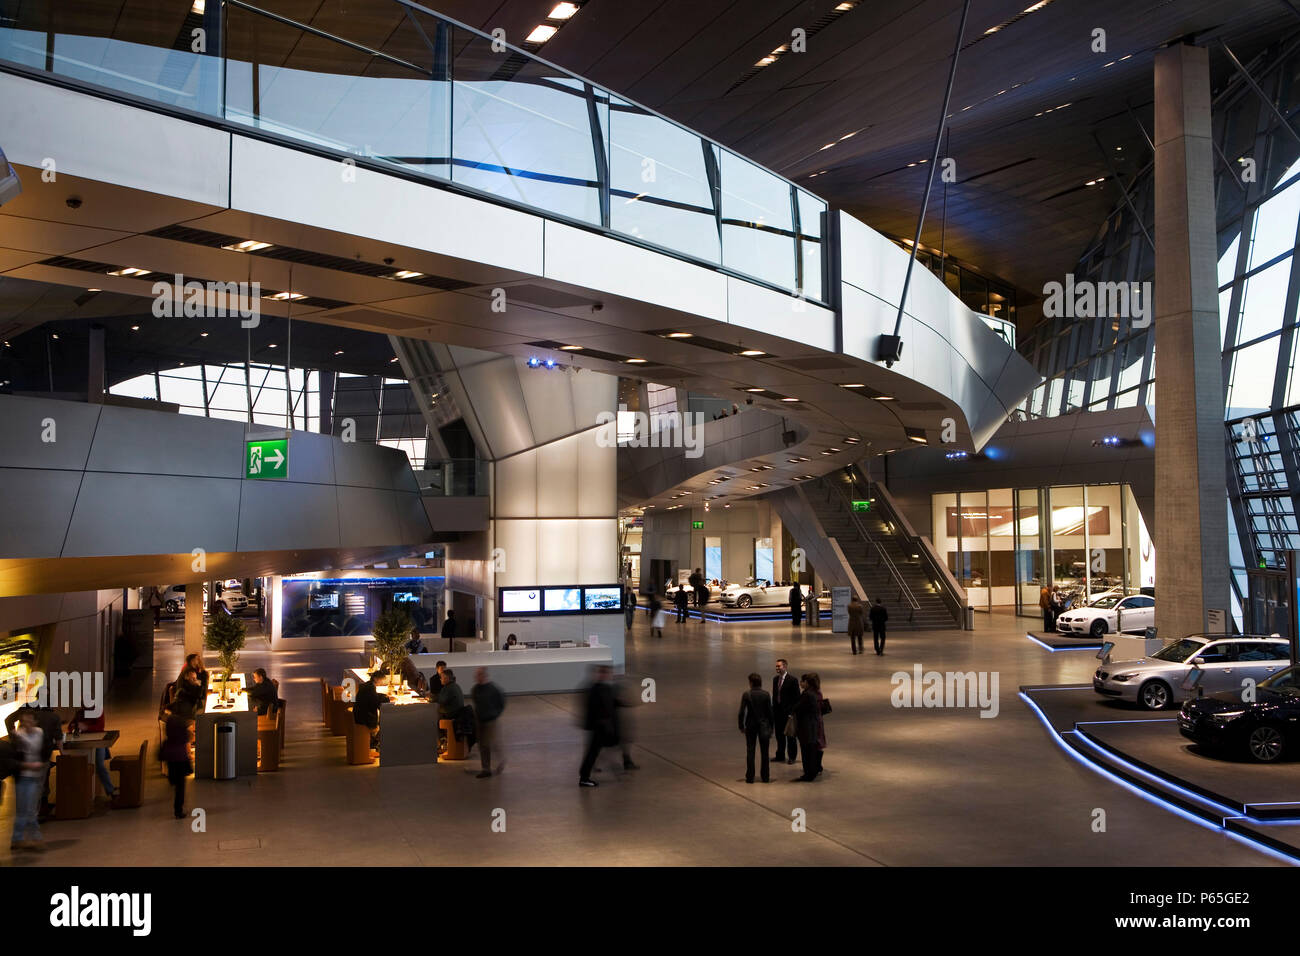 BMW WELT (BMW World), Munich, Germany. Opened in October 2007, the 100 Million Euro project boosts a Gross floor area of 73,000 m2 for an planned aver Stock Photo